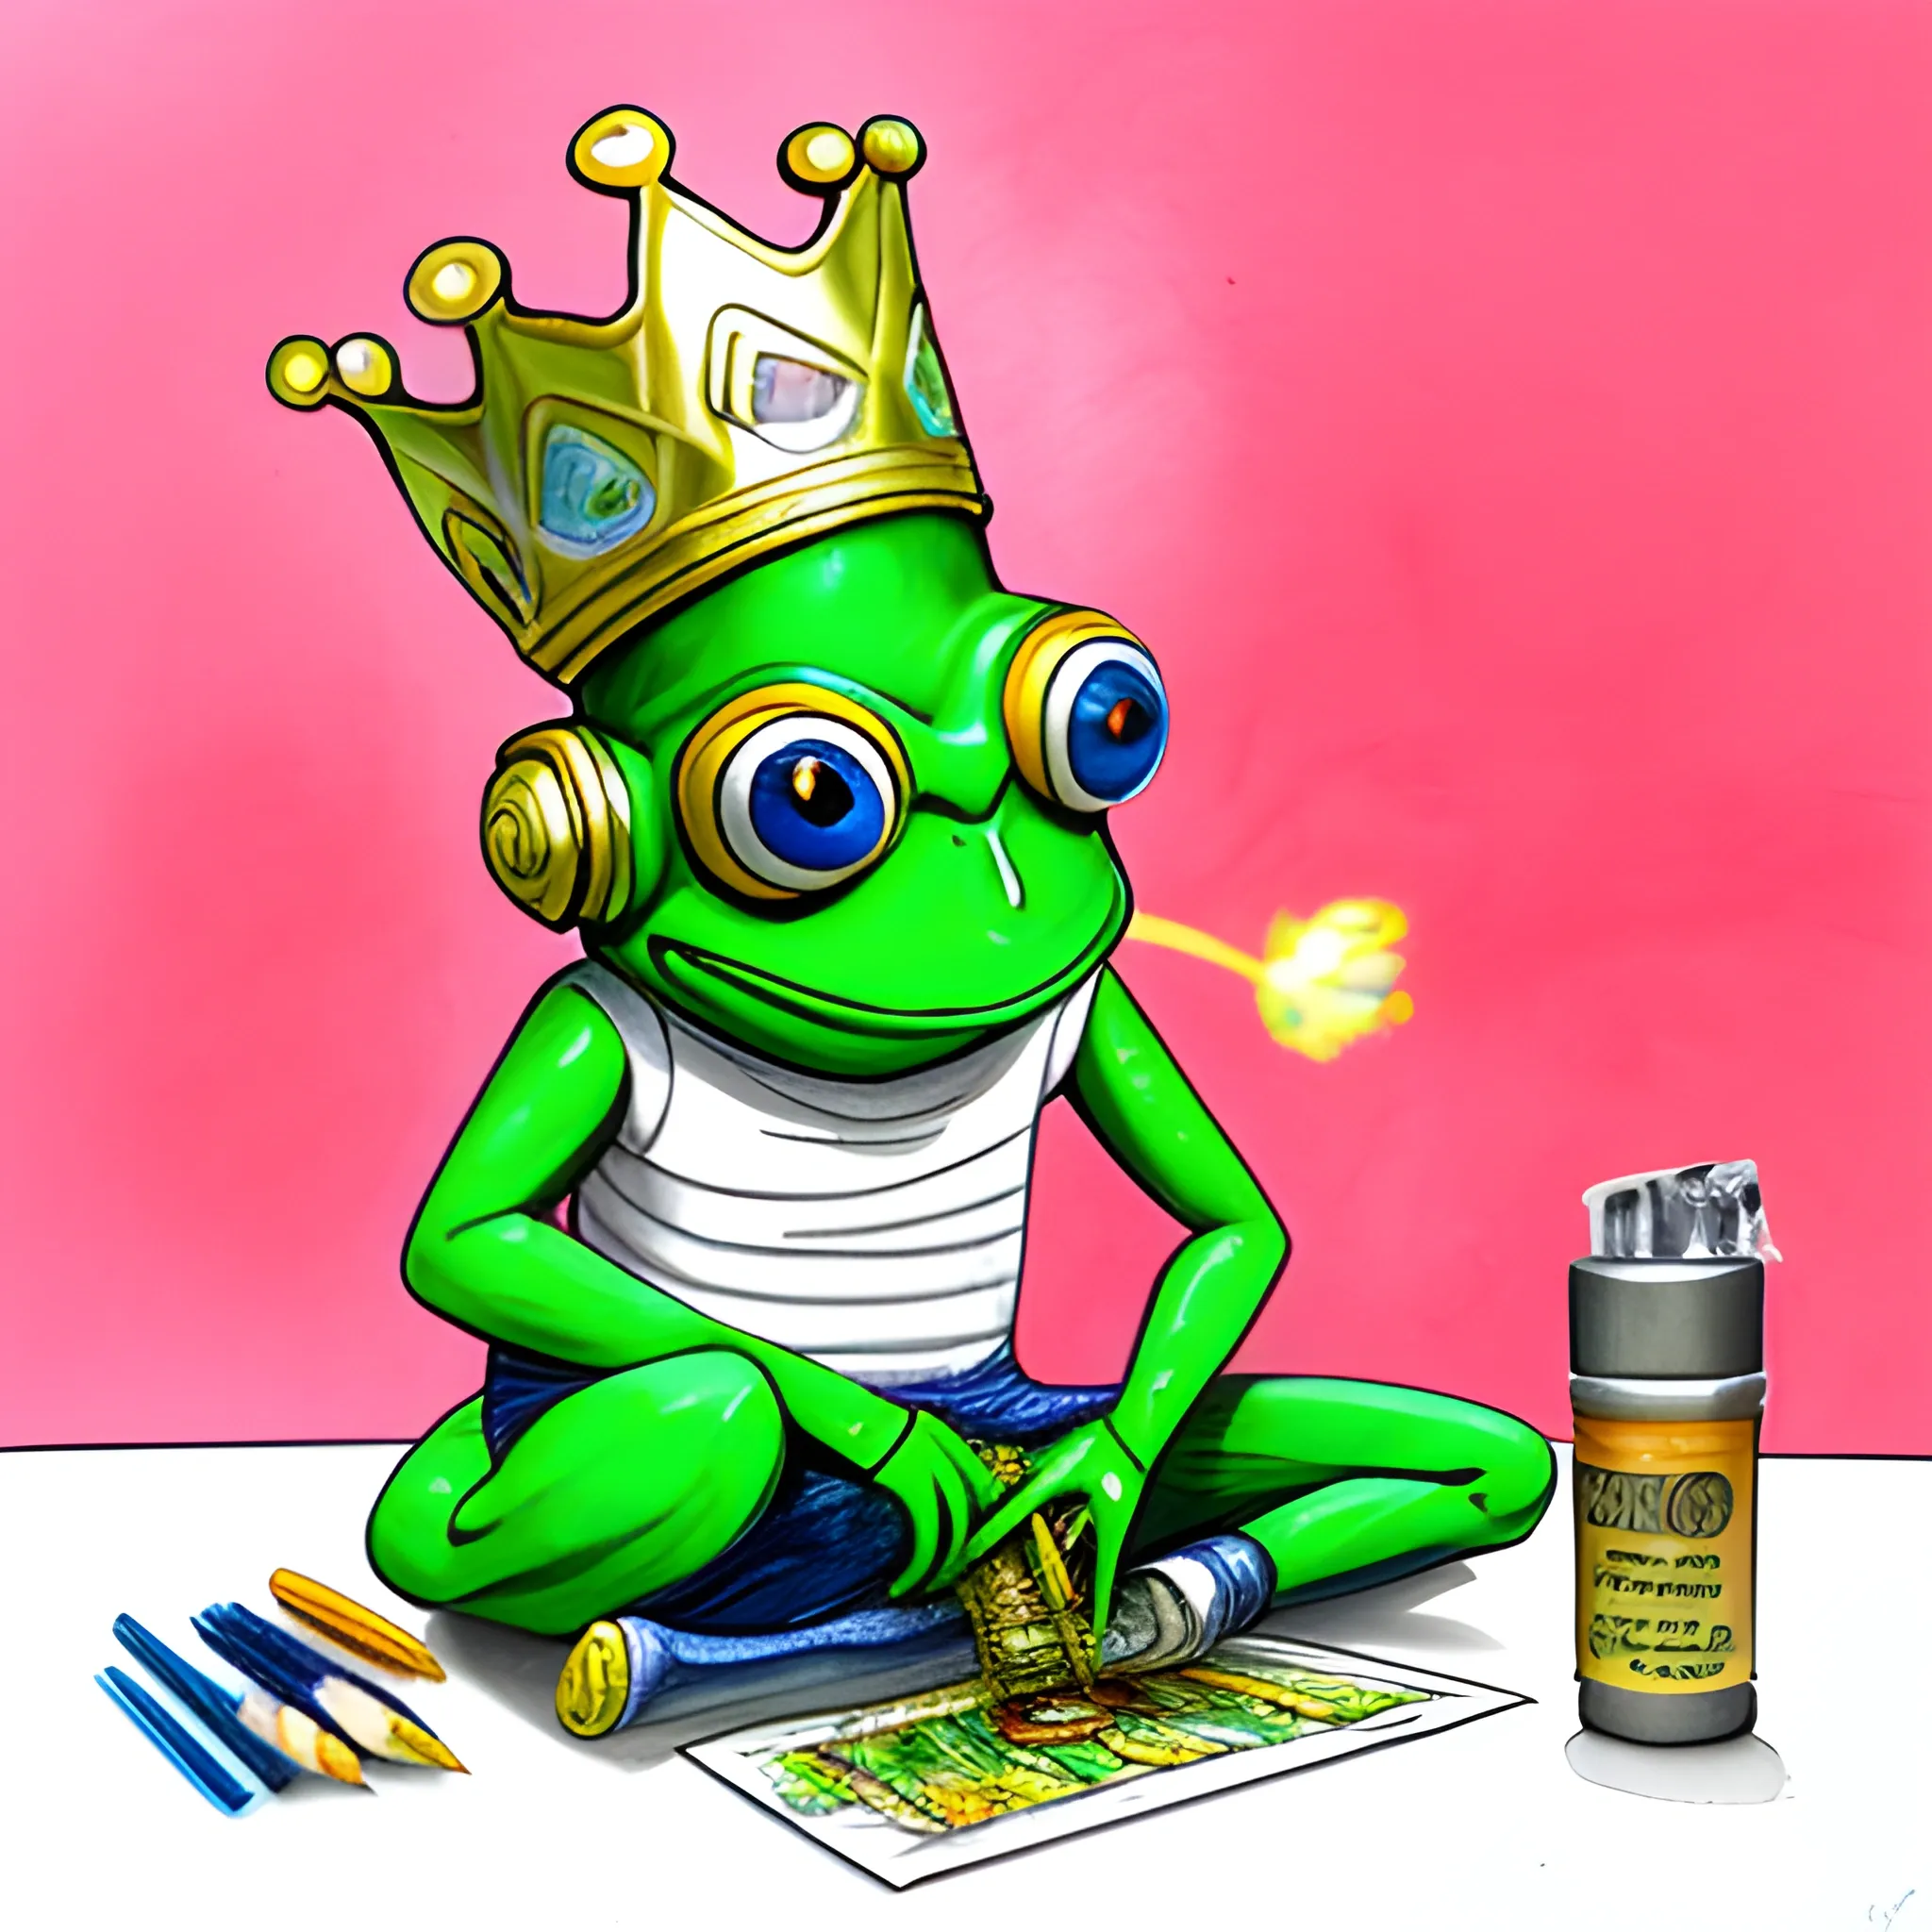 Man with a frog mask, green frog head with a gold crown with shiny diamonds on his head. The man looks like a Hispanic DJ in a recording studio sitting, in a warm, realistic tin, warm colors on the walls, LED light comes out. a=pink and blue colors super 4k
, Pencil Sketch, Cartoon, Pencil Sketch, Water Color, Oil Painting, Trippy, Cartoon, 3D, Pencil Sketch, Water Color, Trippy, Cartoon, 3D, Pencil Sketch, Water Color, Trippy, 3D, Pencil Sketch